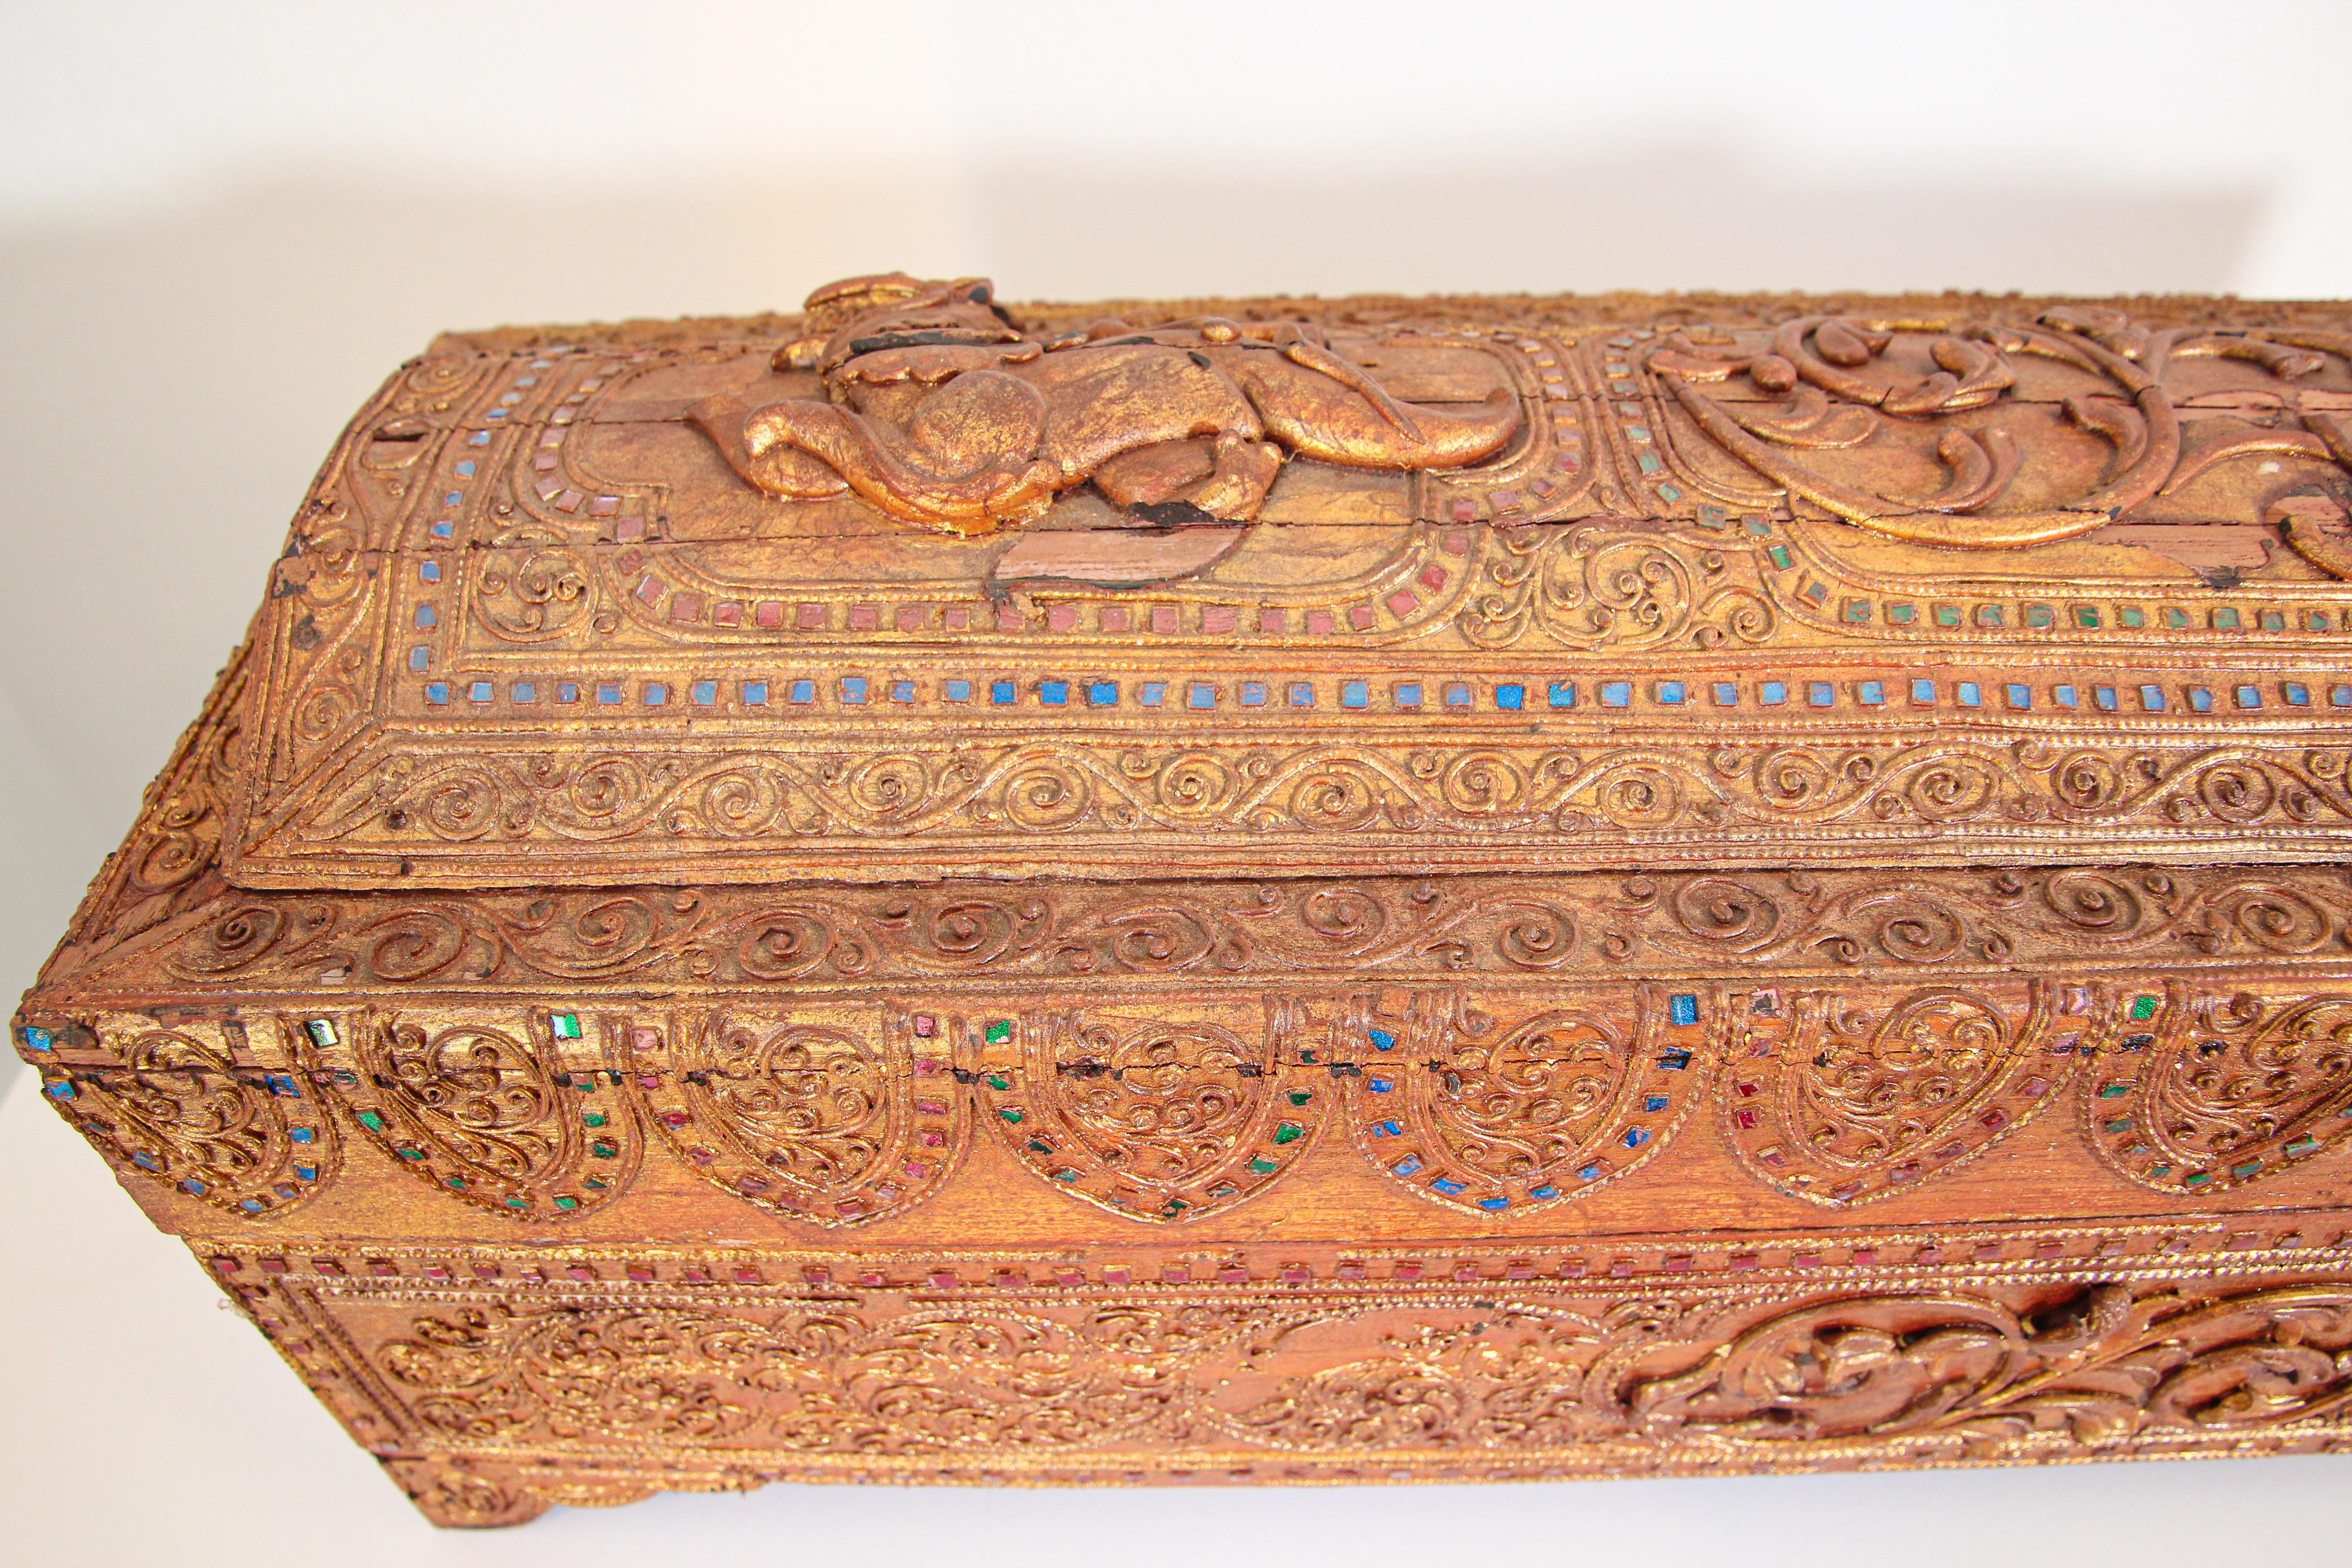 what are the burmese large rectangular wooden and gold gilt manuscript boxes